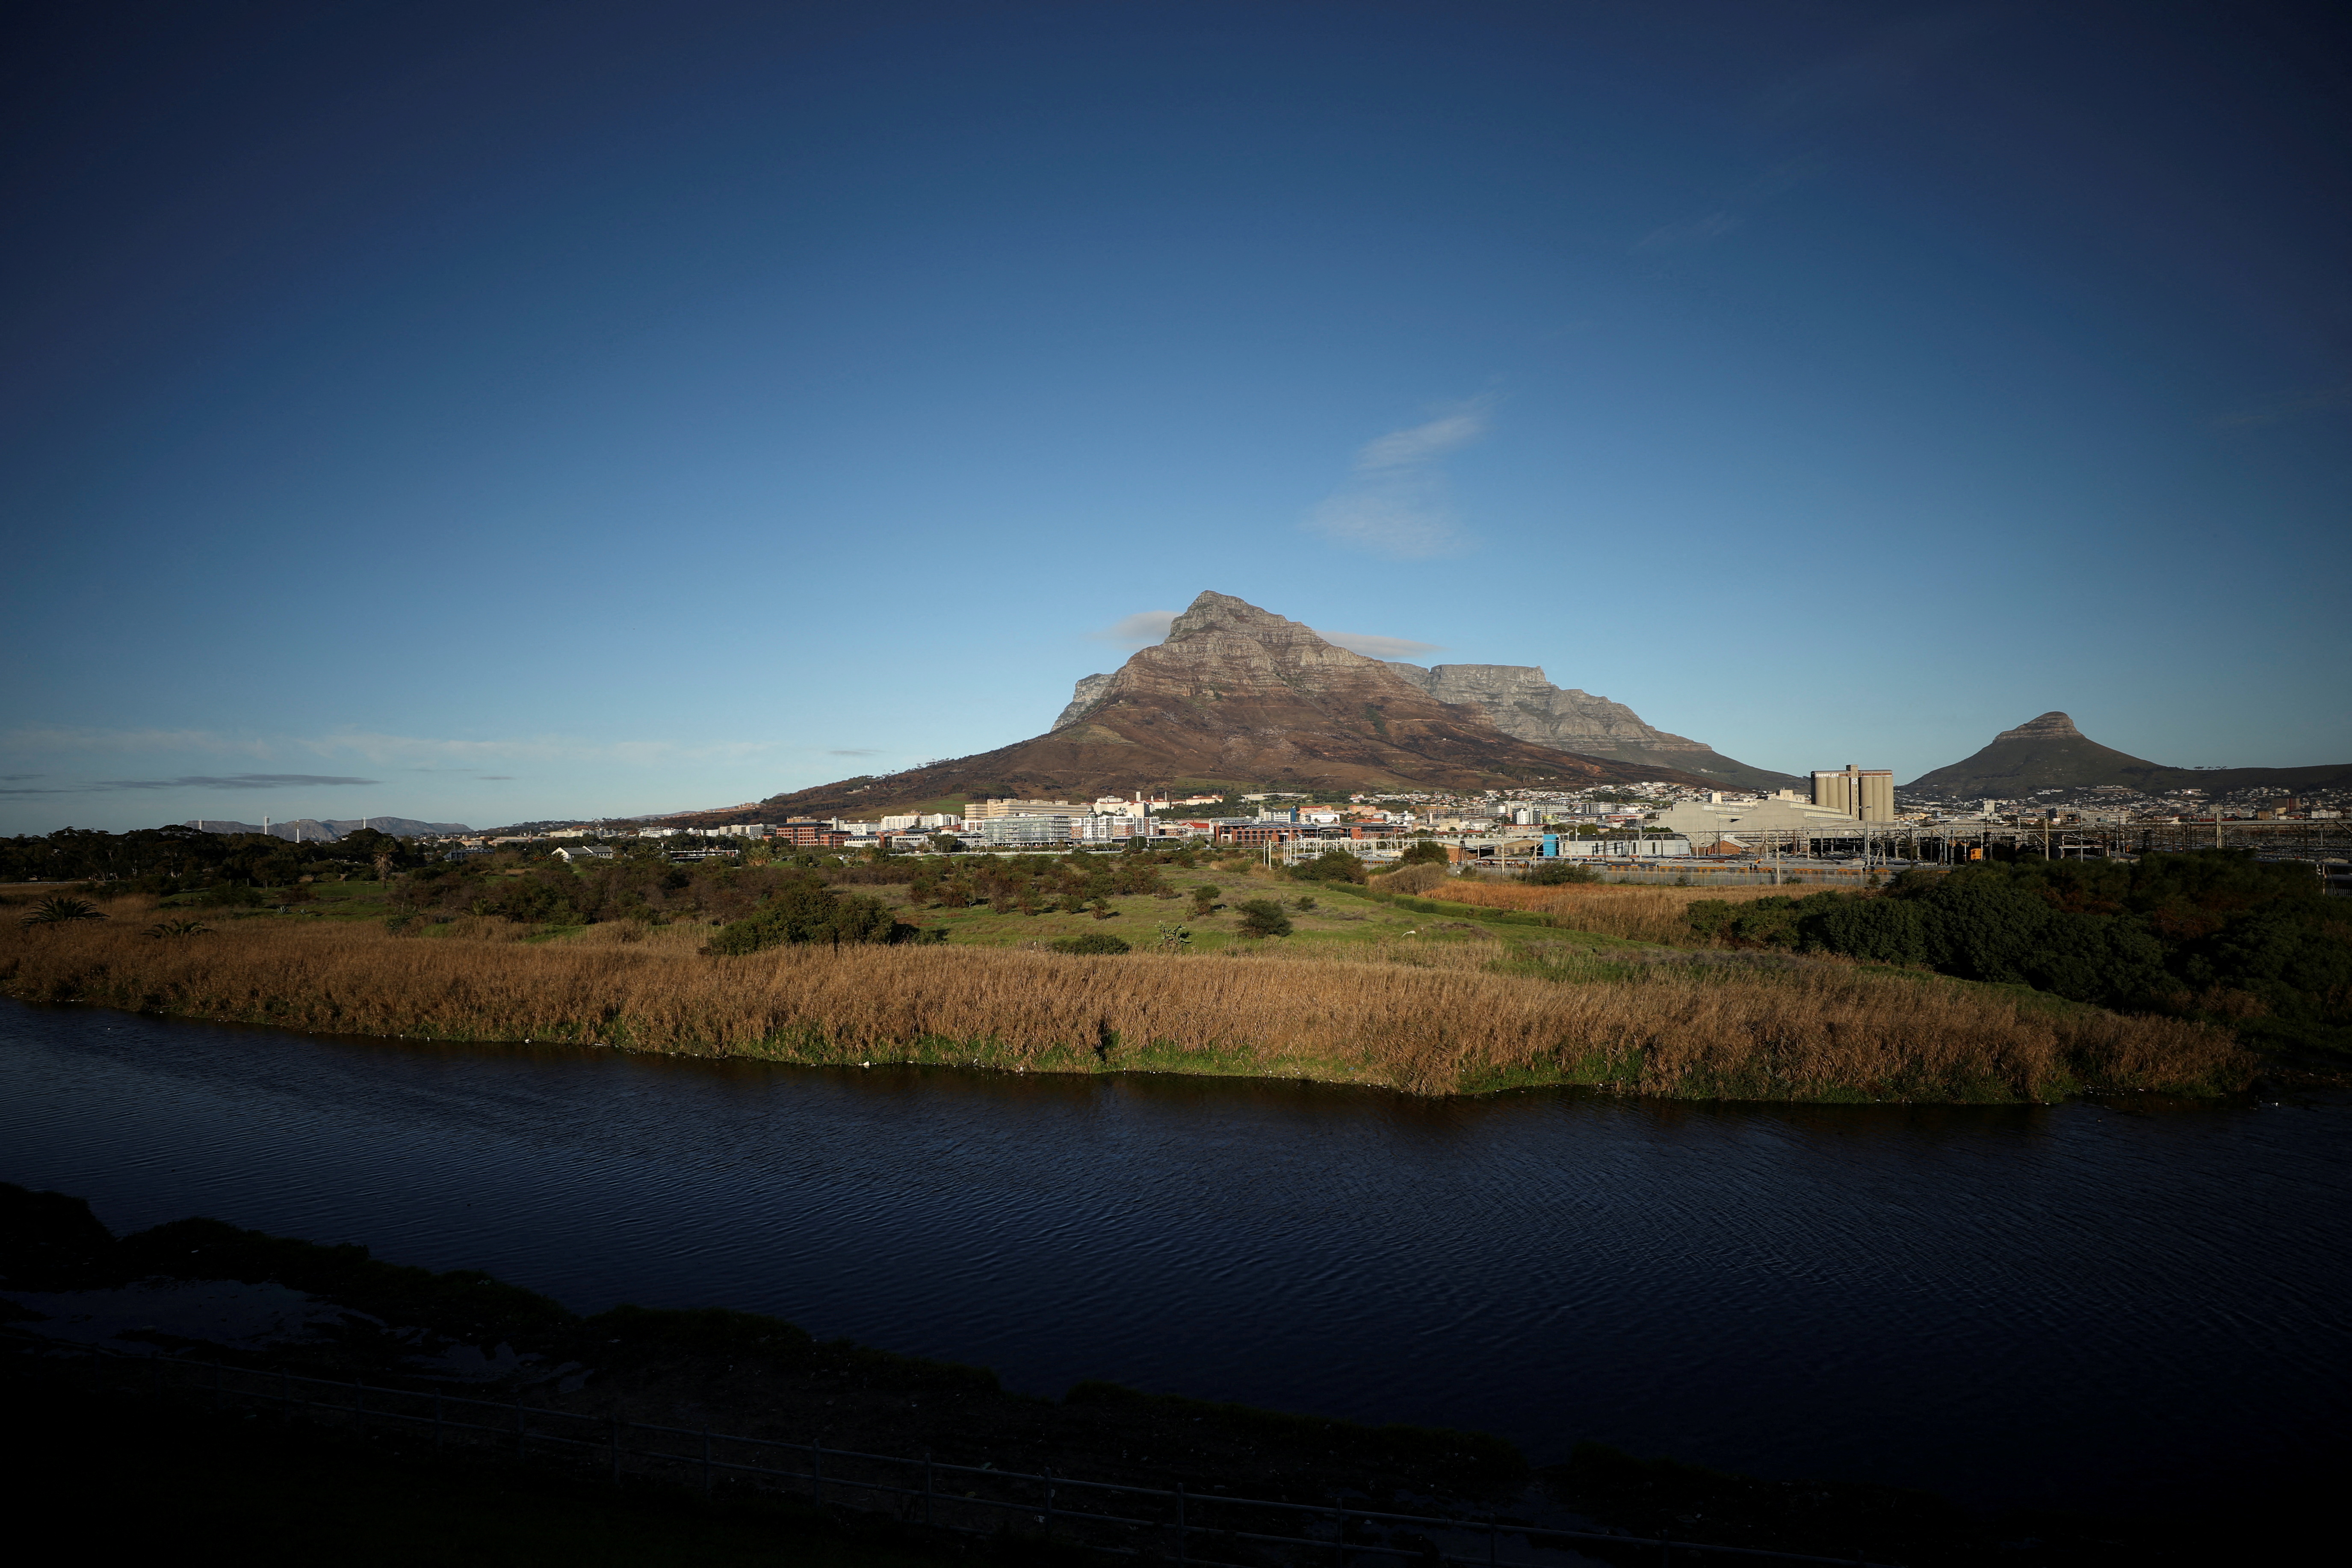 Contested land earmarked for a development which includes a new Africa headquarters for U.S. retail giant Amazon is seen alongside the Black River in Cape Town